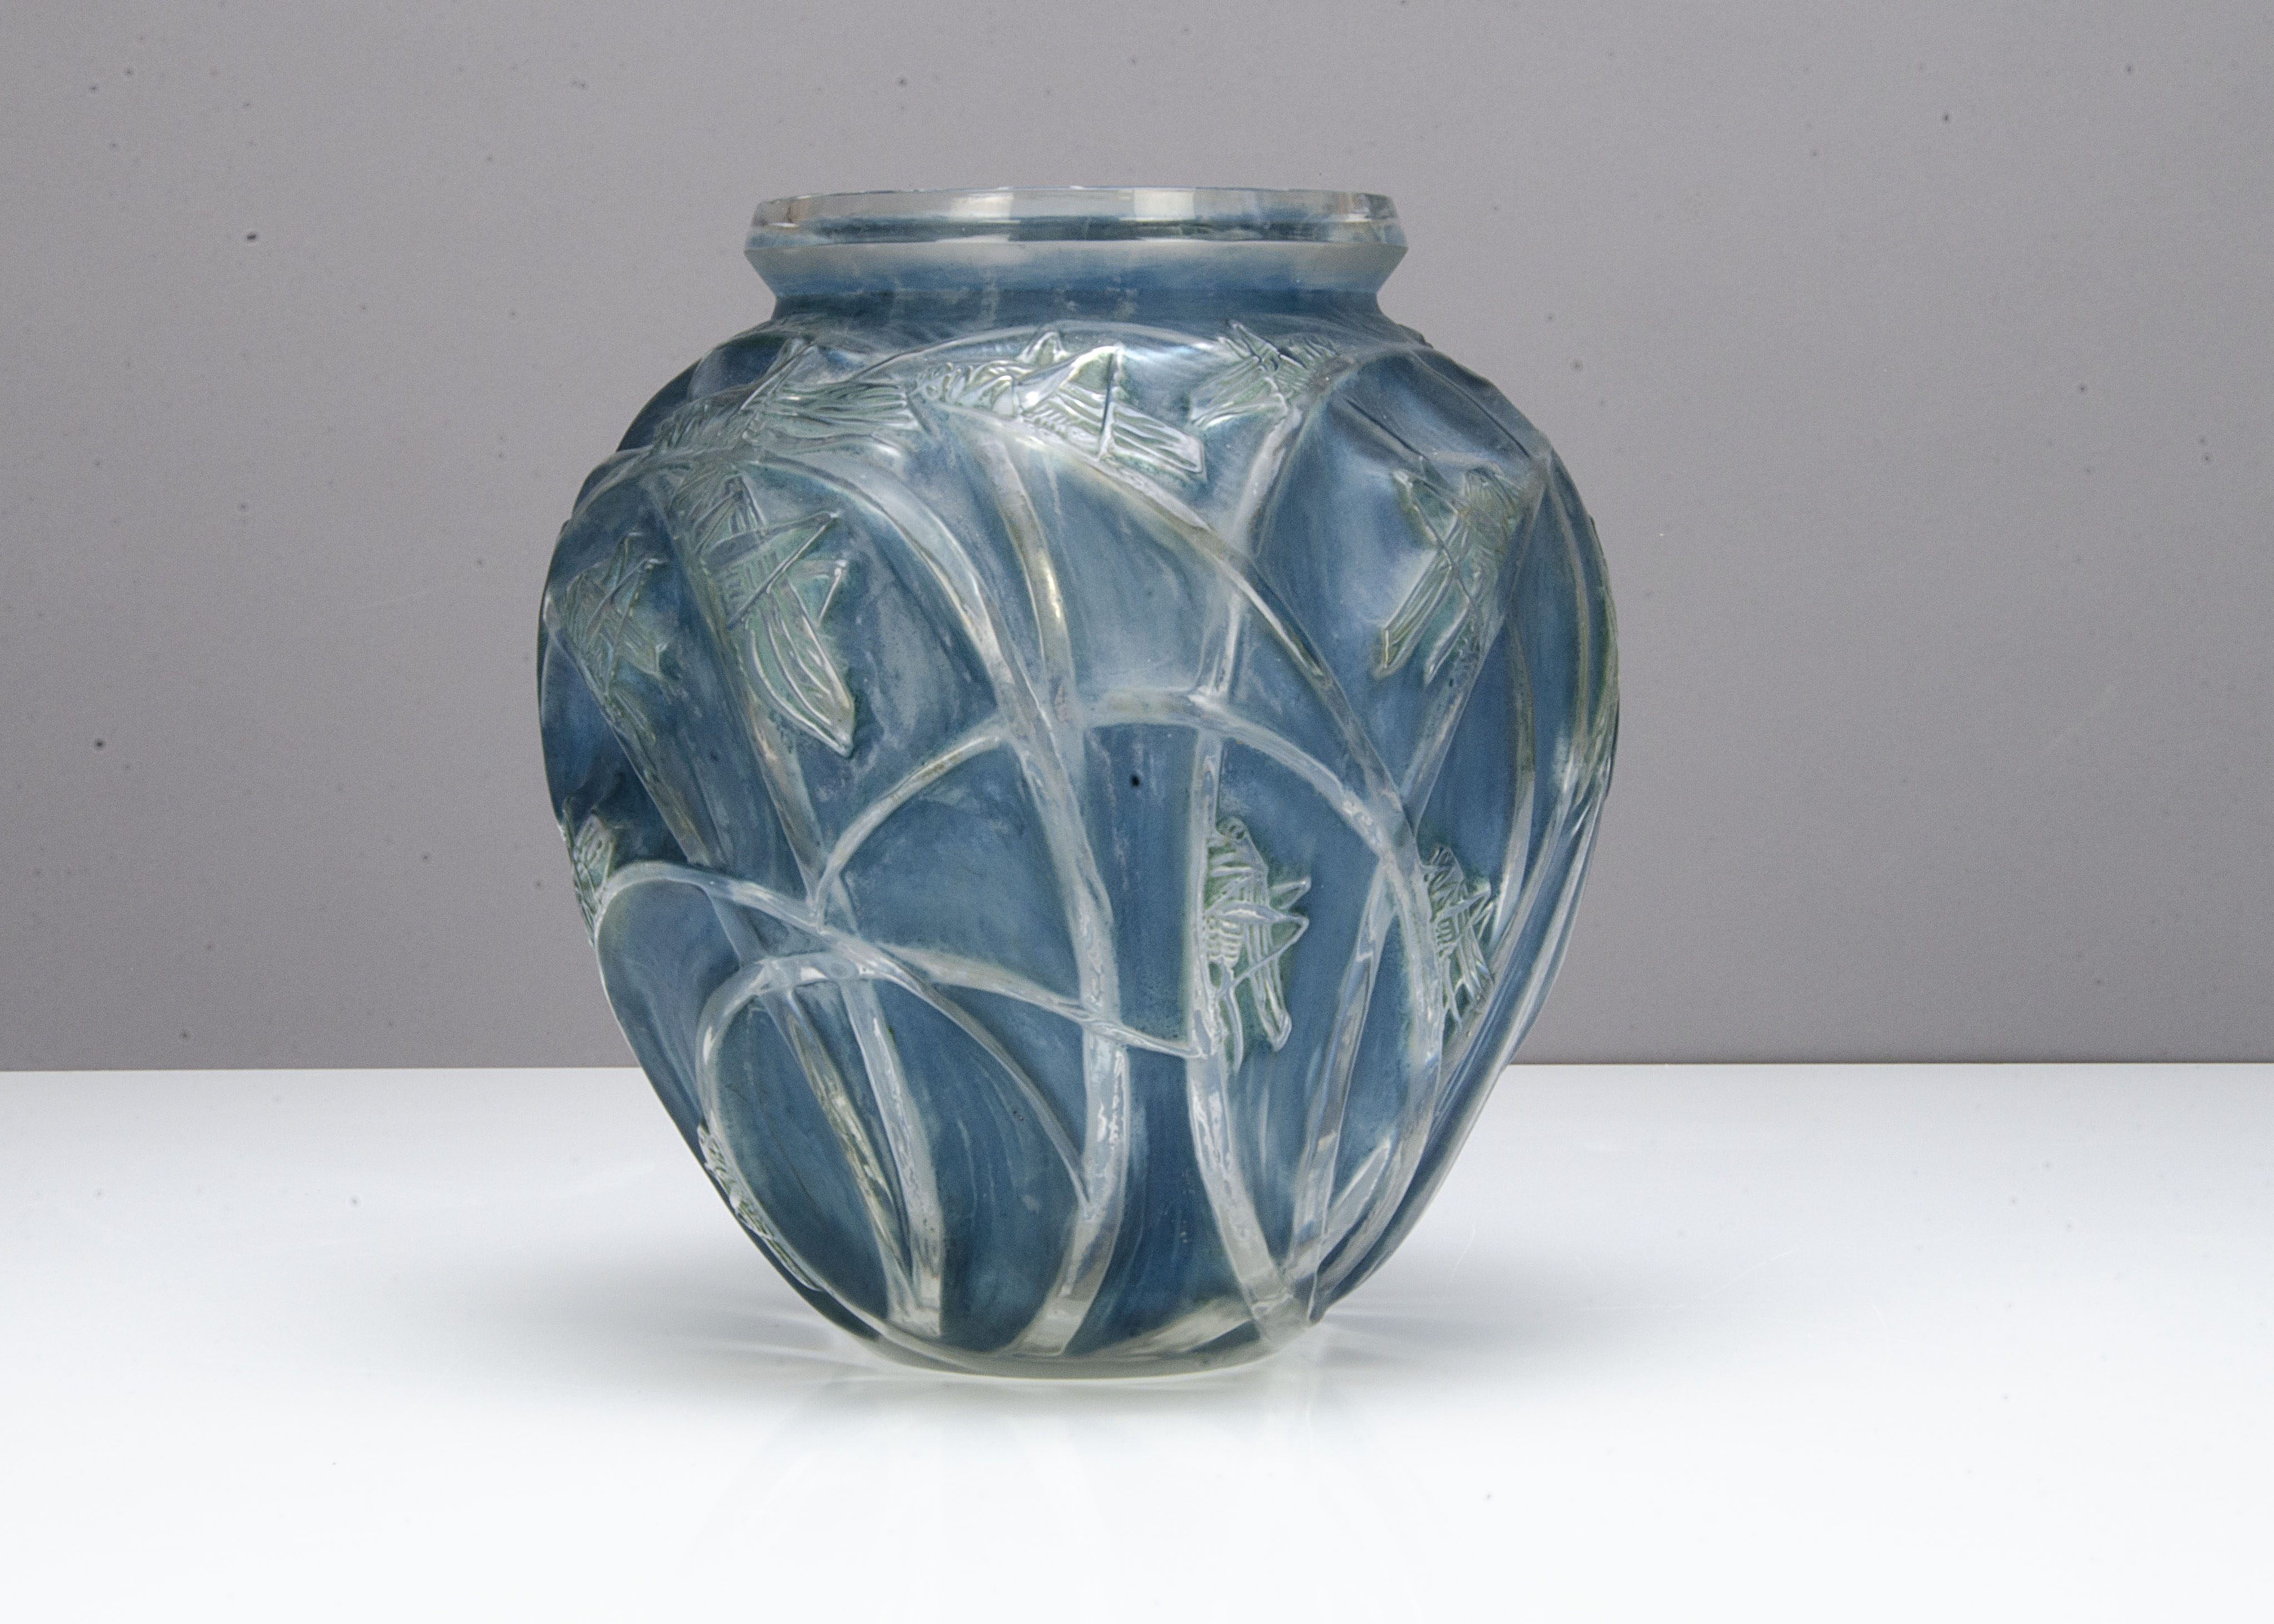 A Rene Lalique Sauterelles ovoid glass vase, frosted blue and green, catalogue number 888, ovoid